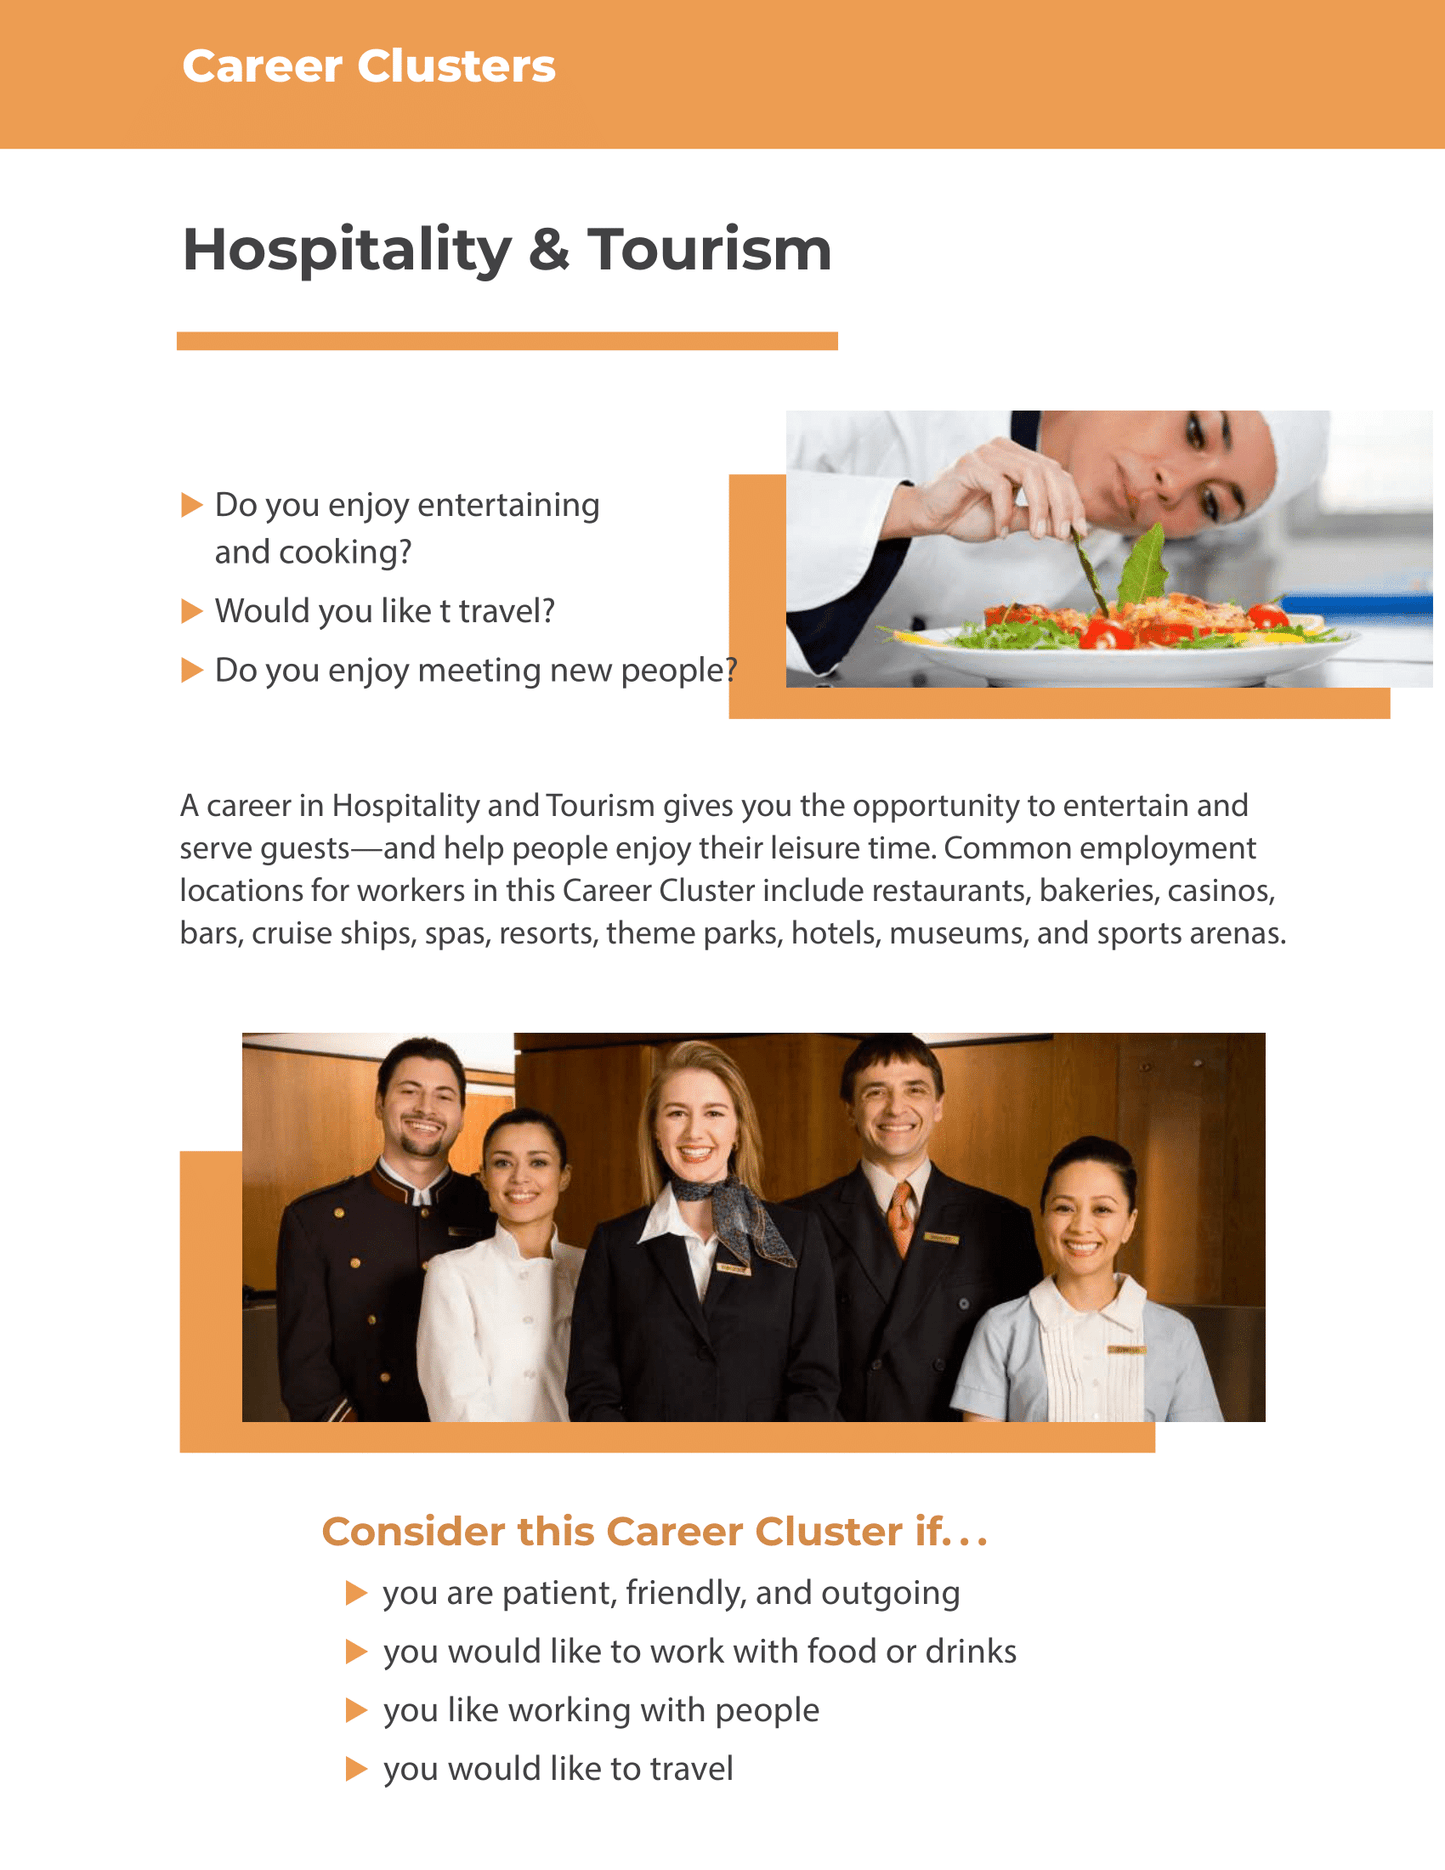 Career Clusters - Hospitality and Tourism